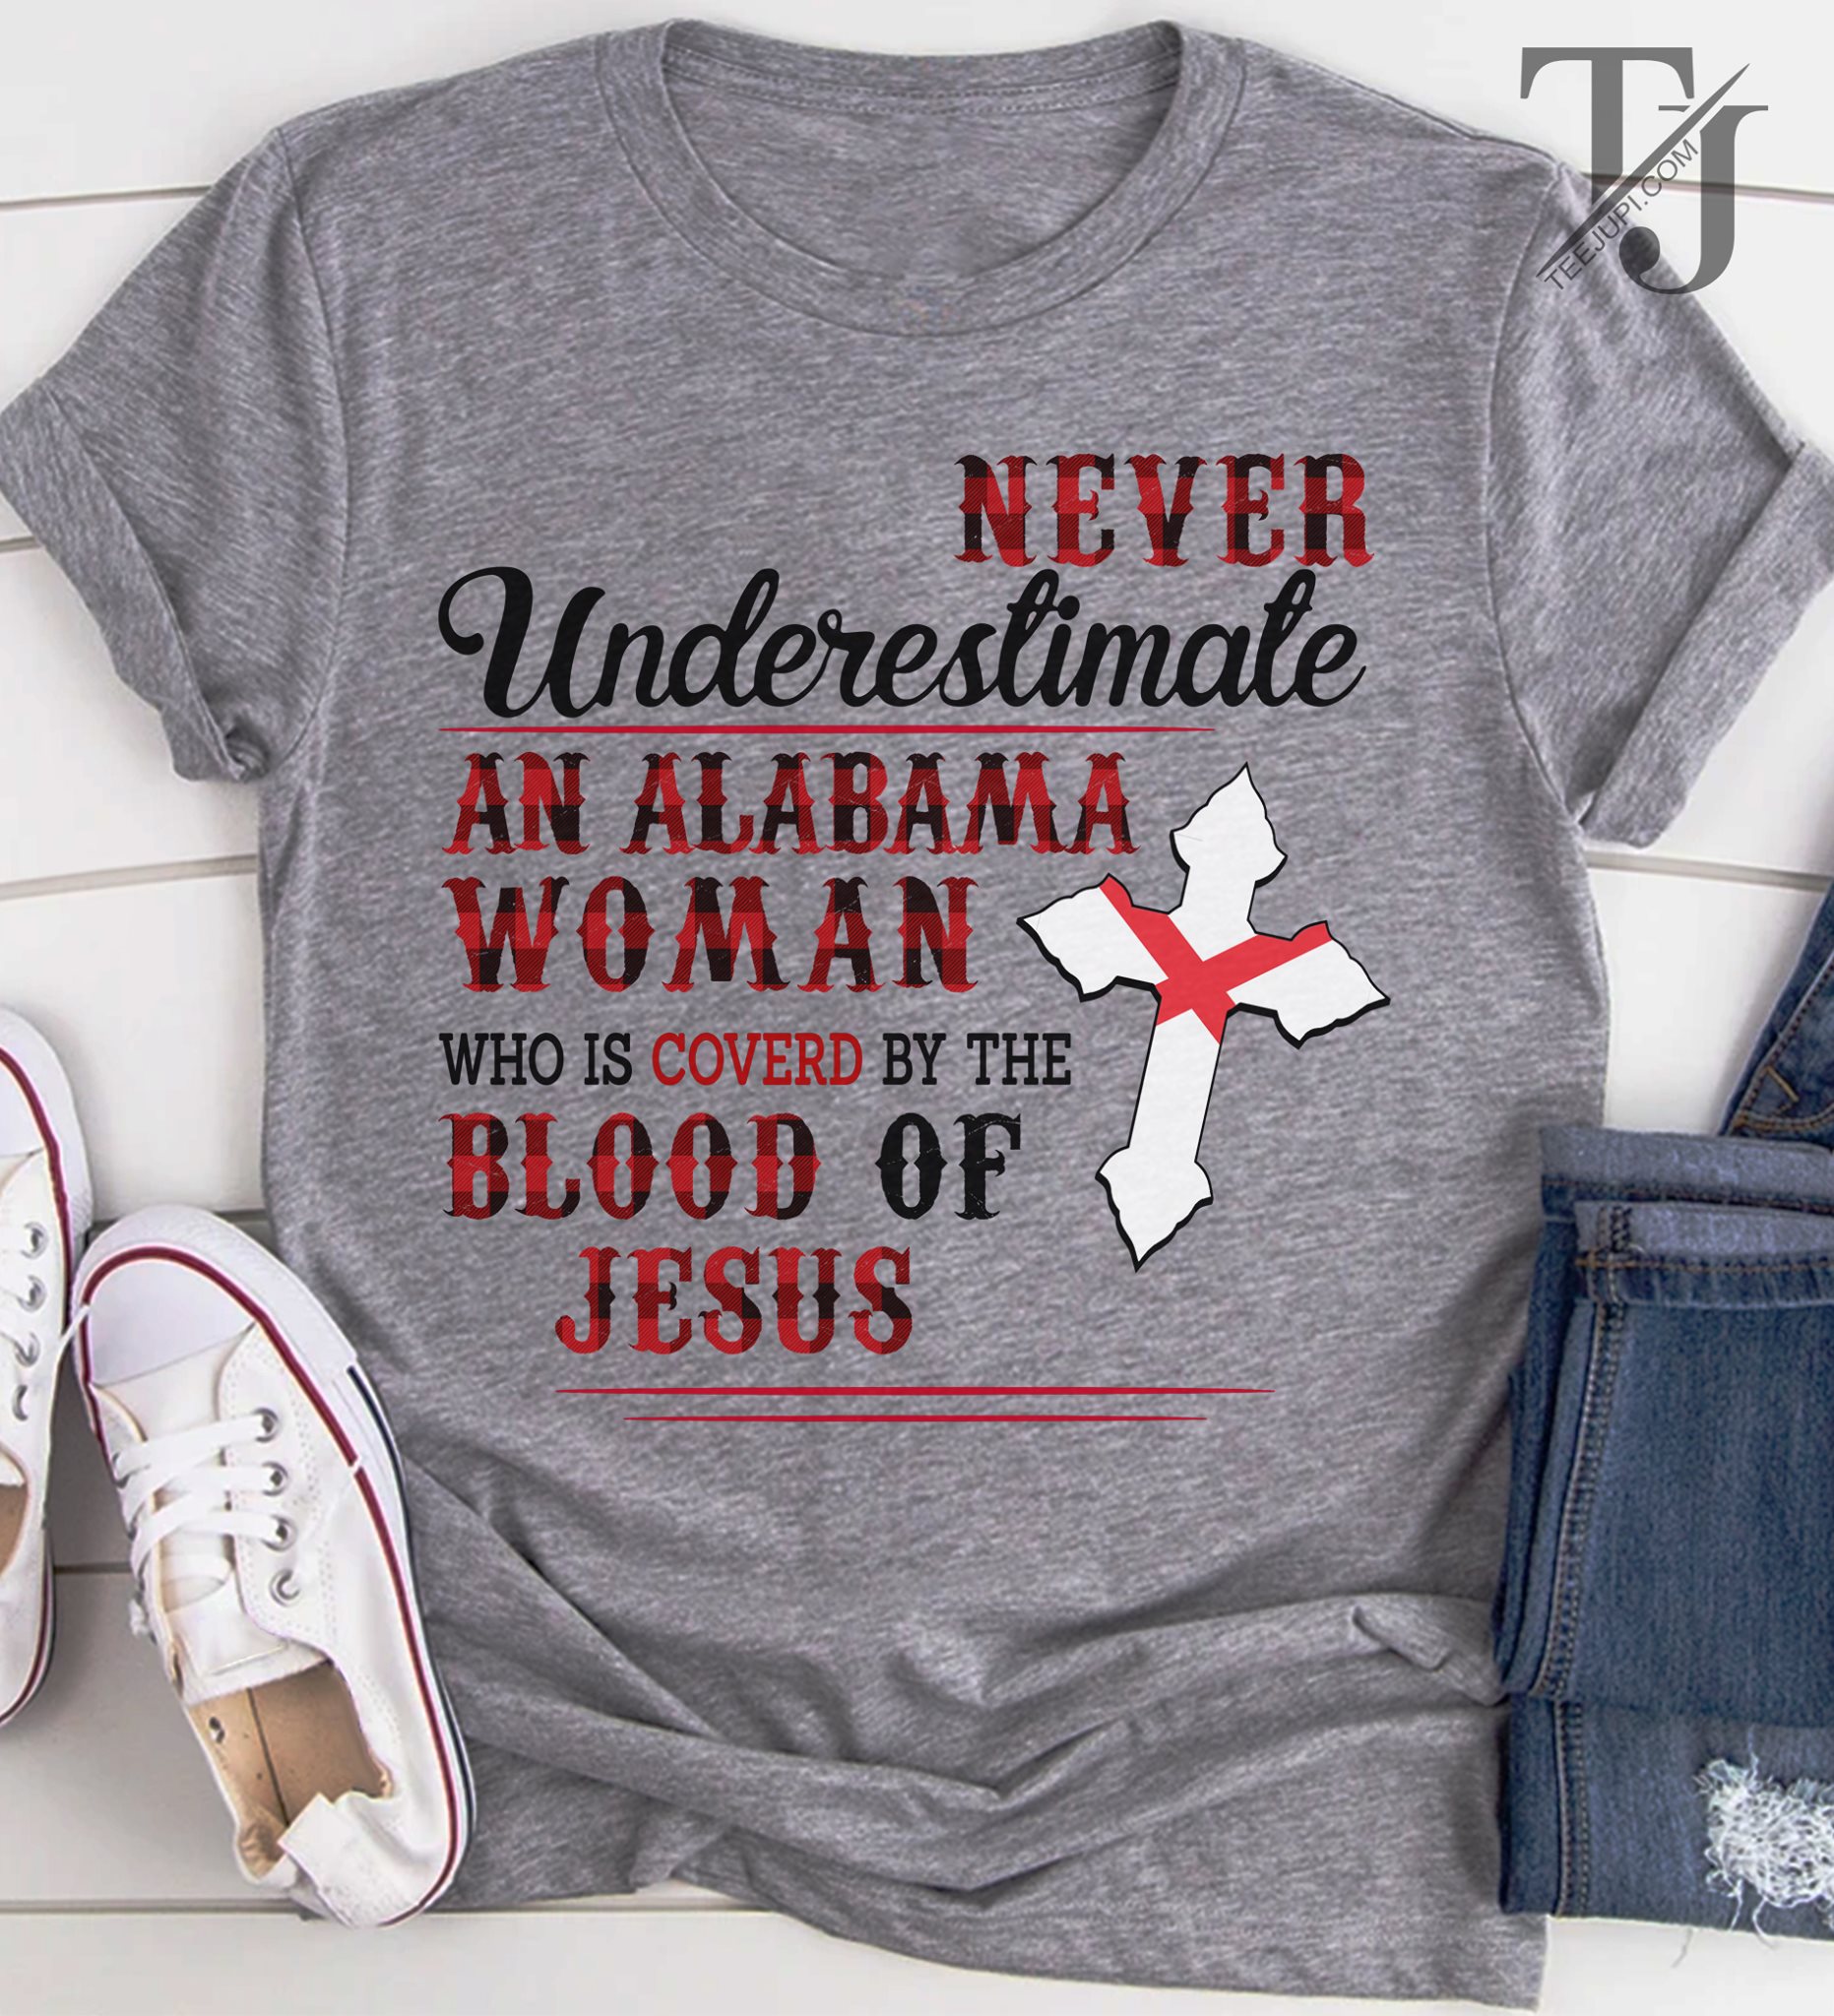 Never underestimate a woman who is covered by the blood of Jesus